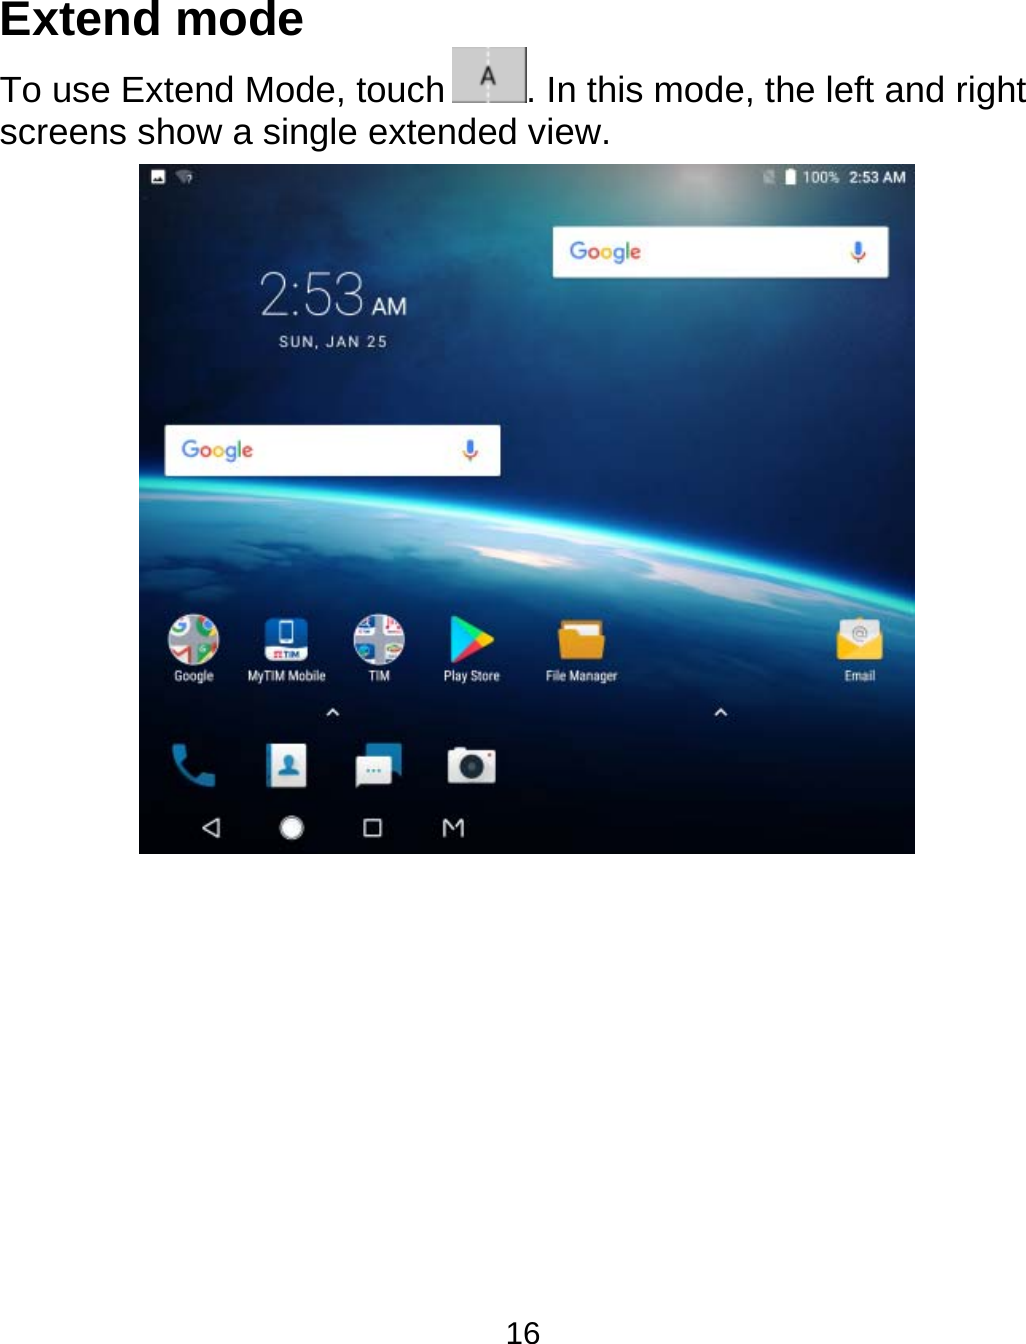  16 Extend mode To use Extend Mode, touch . In this mode, the left and right screens show a single extended view.         